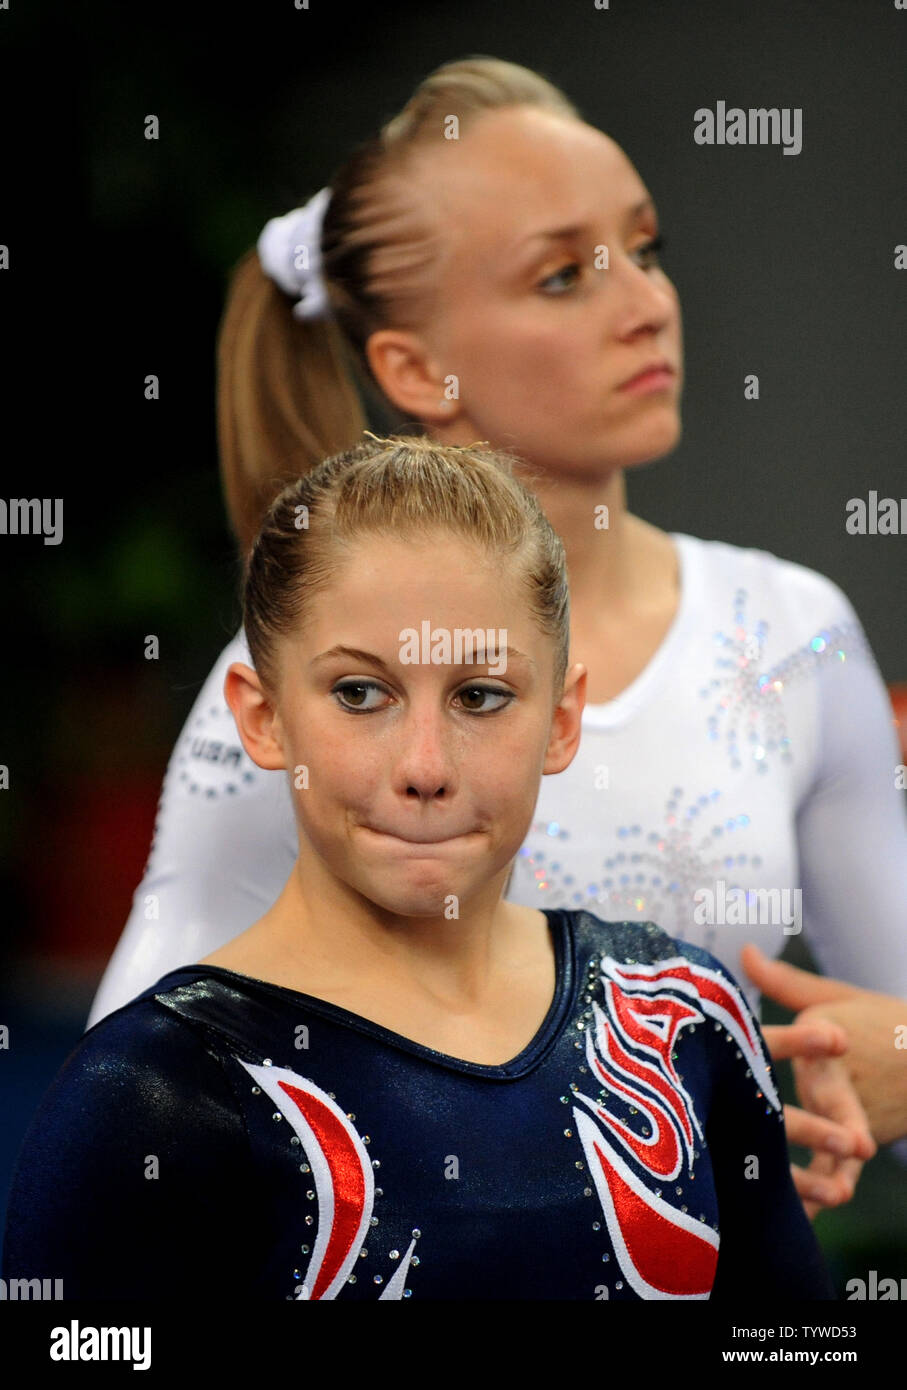 USA's gold medalist Shawn Johnson (front) and silver medalist Nastia Liukin wait to enter the arena to accept their medal for their performances on the beam during the Women's Beam Final in the apparatus finals at the National Indoor Gymnastics Stadium at the Summer Olympics in Beijing on August 19, 2008.   (UPI Photo/Pat Benic) Stock Photo